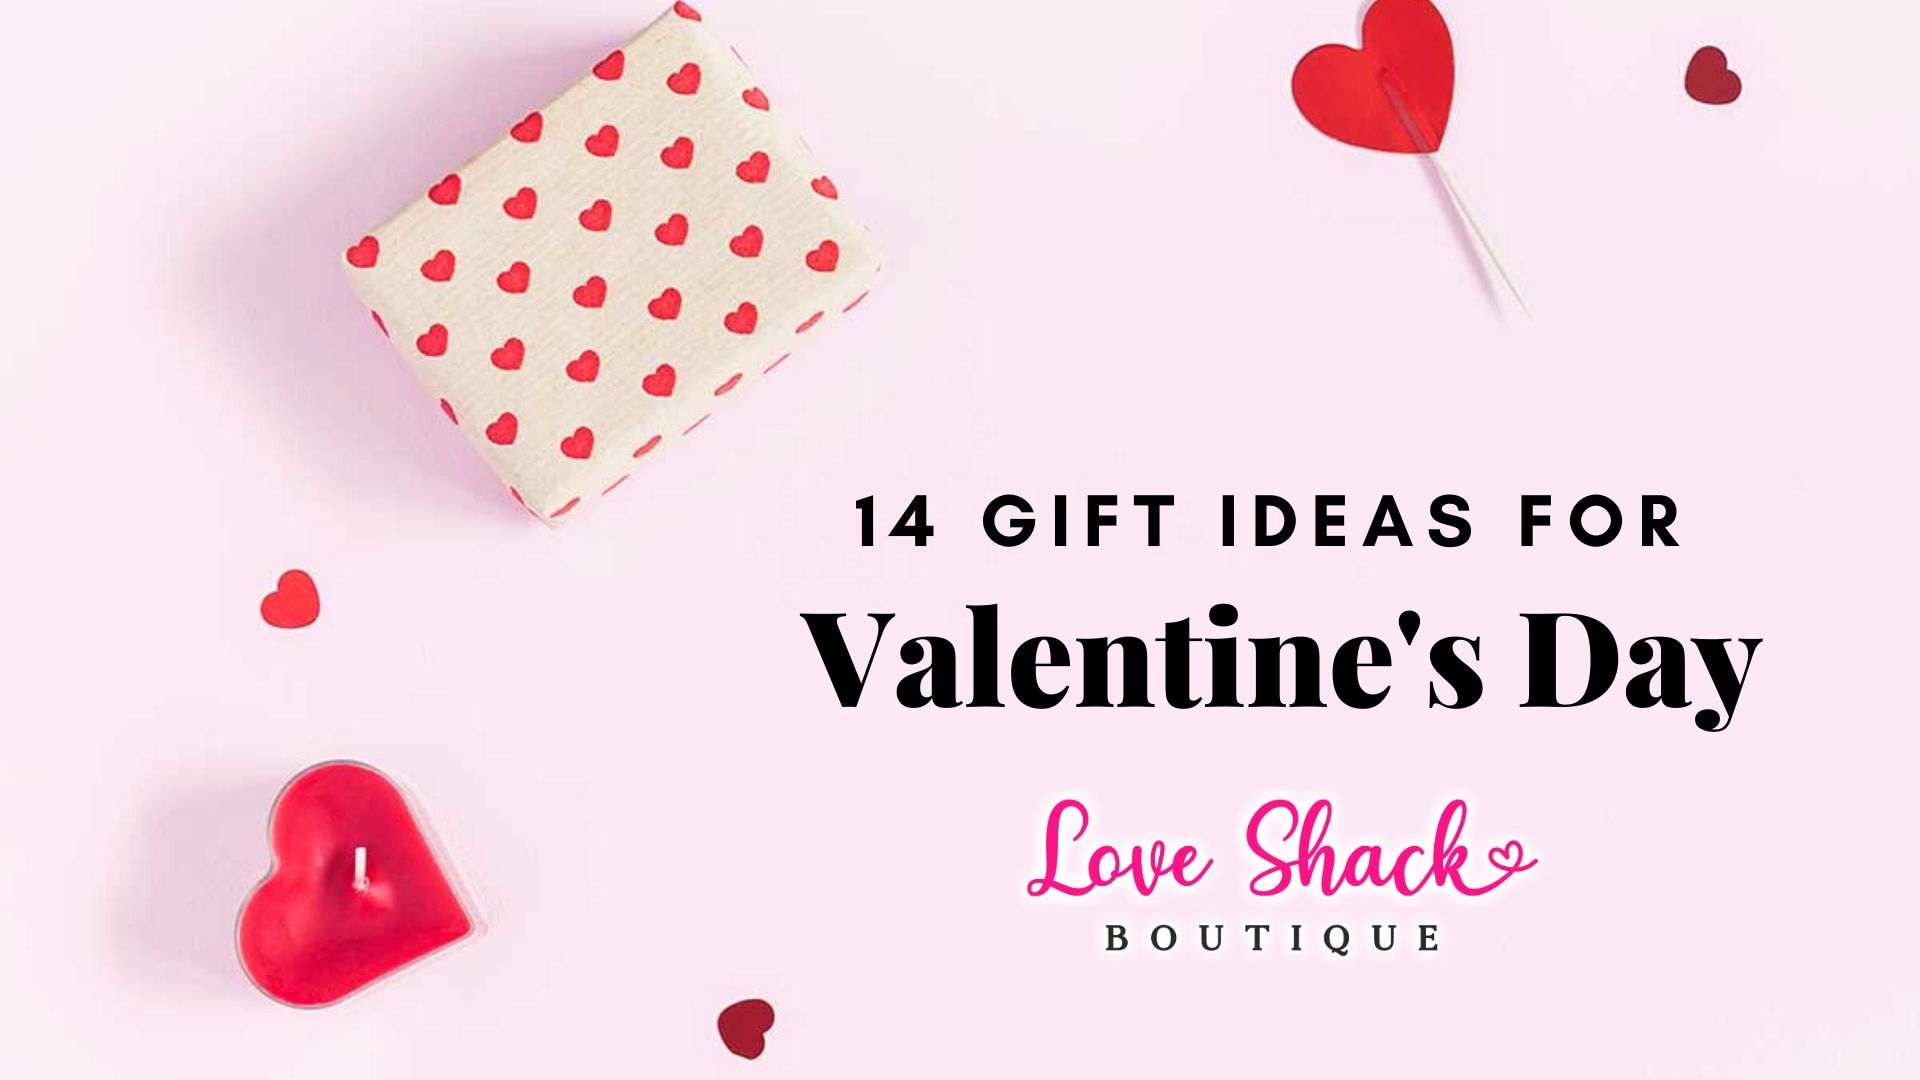 14 Gift Ideas for Valentine’s Day